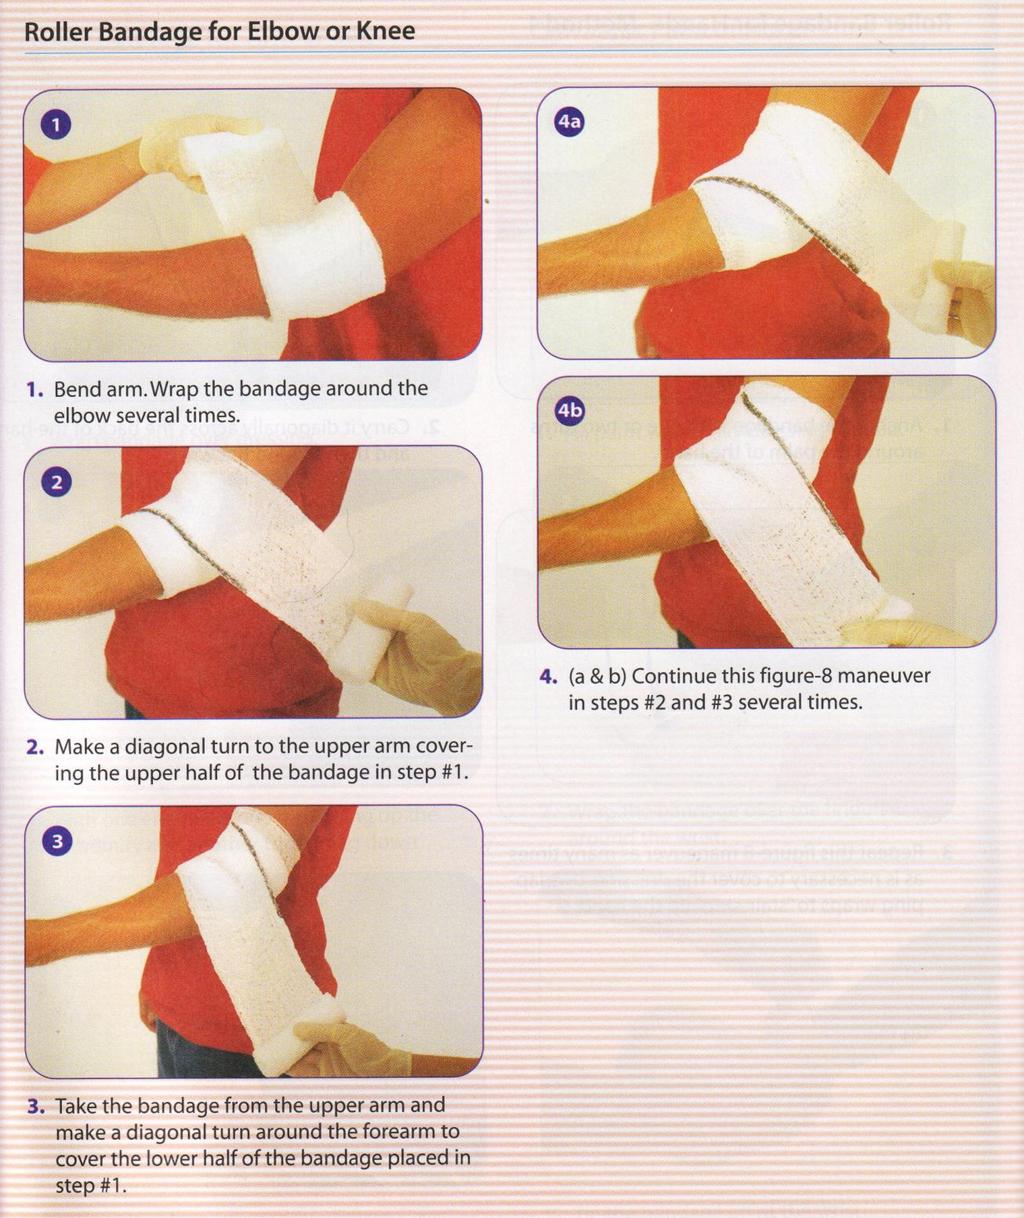 Scenario 3, continued: Knee: Using a roller bandage, Method 2 (Note** the same procedure would apply to elbows, with a